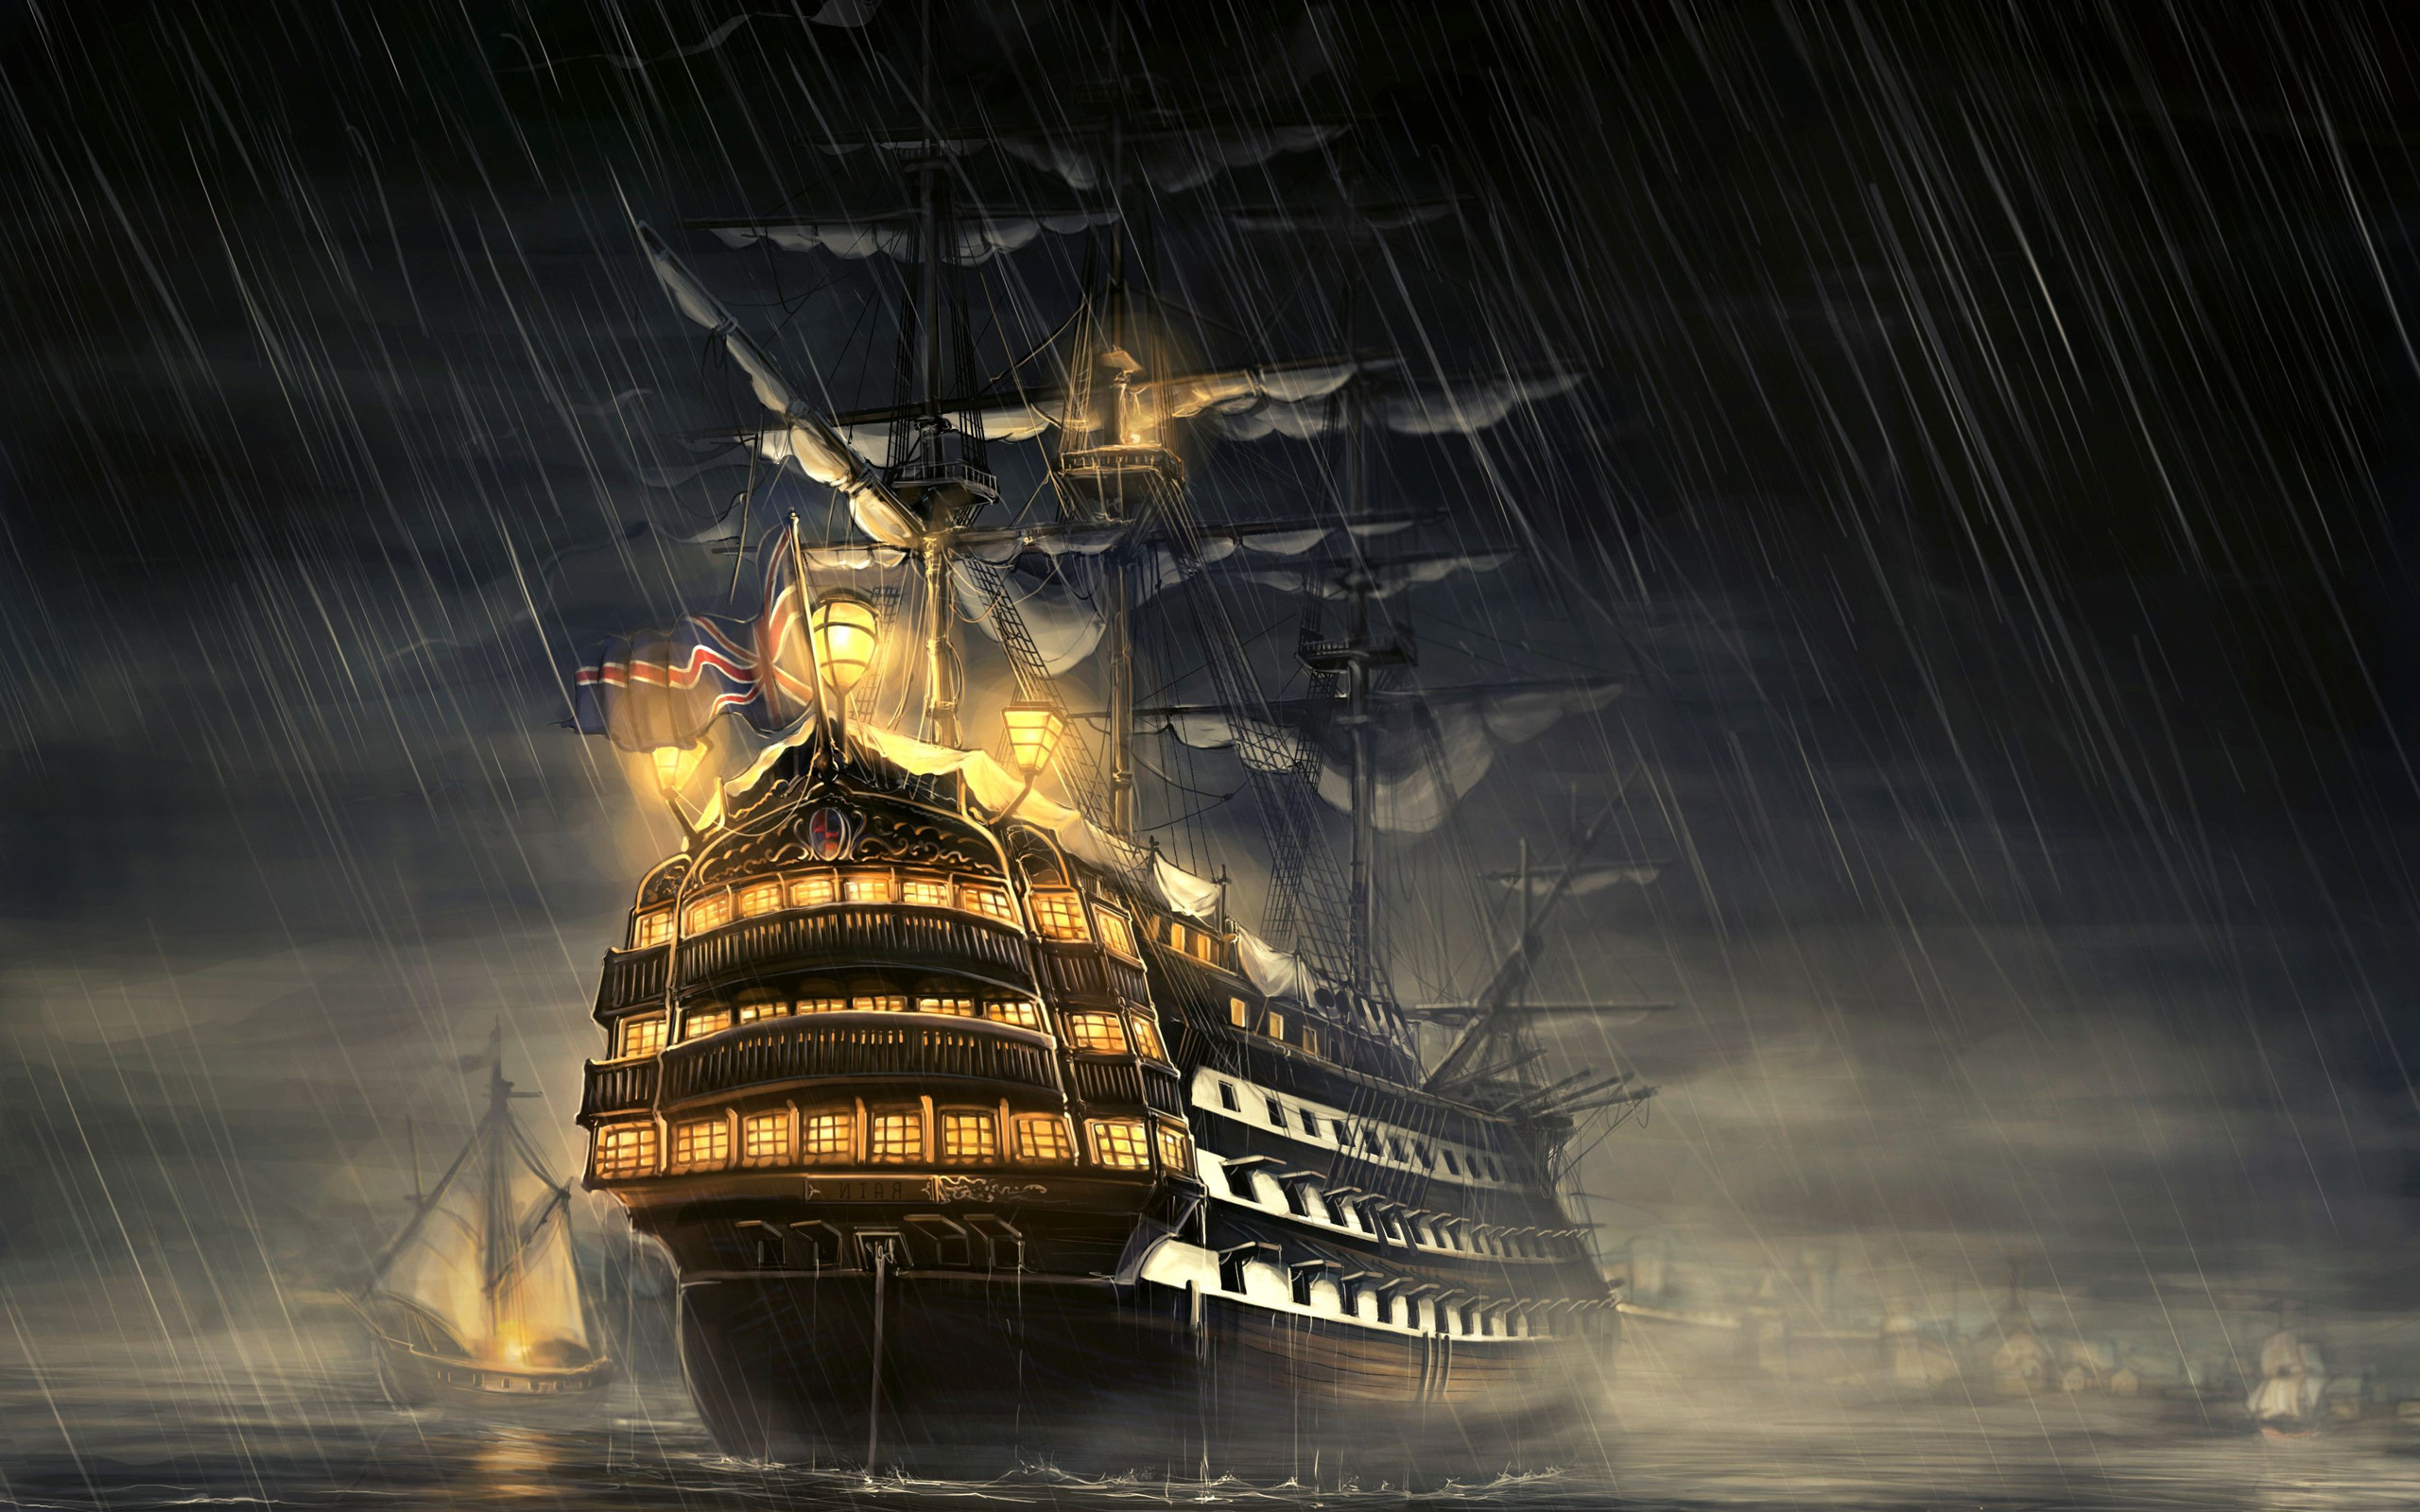 Find out Pirate Ship wallpaper on Desktop Wallpapers Pinterest Pirate ships, Wallpaper and Ships